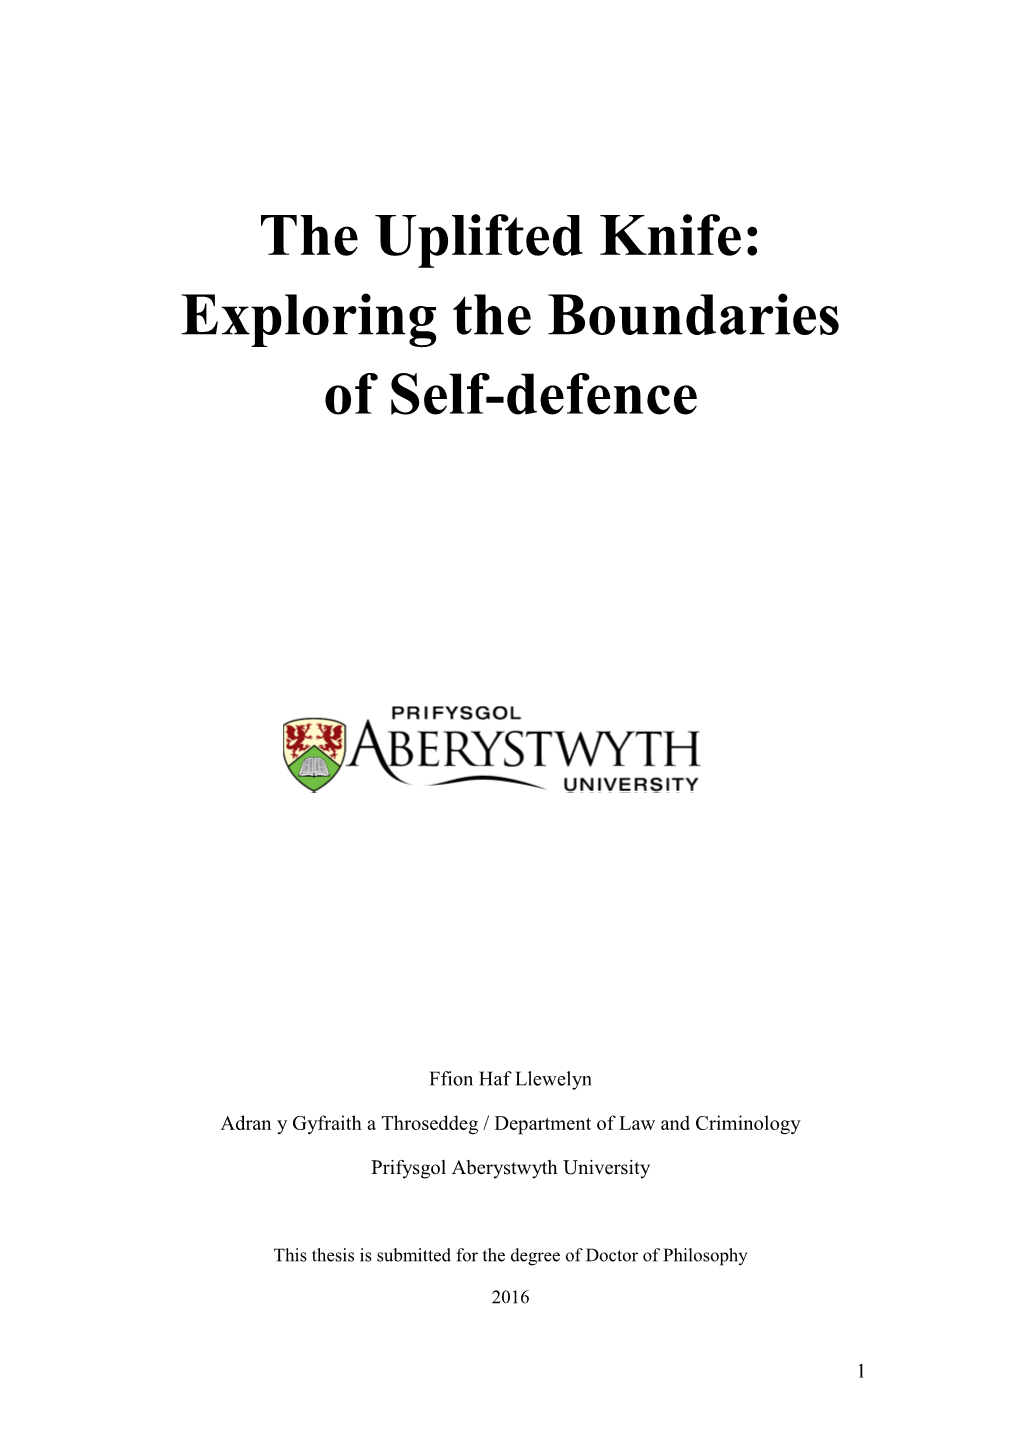 The Uplifted Knife: Exploring the Boundaries of Self-Defence